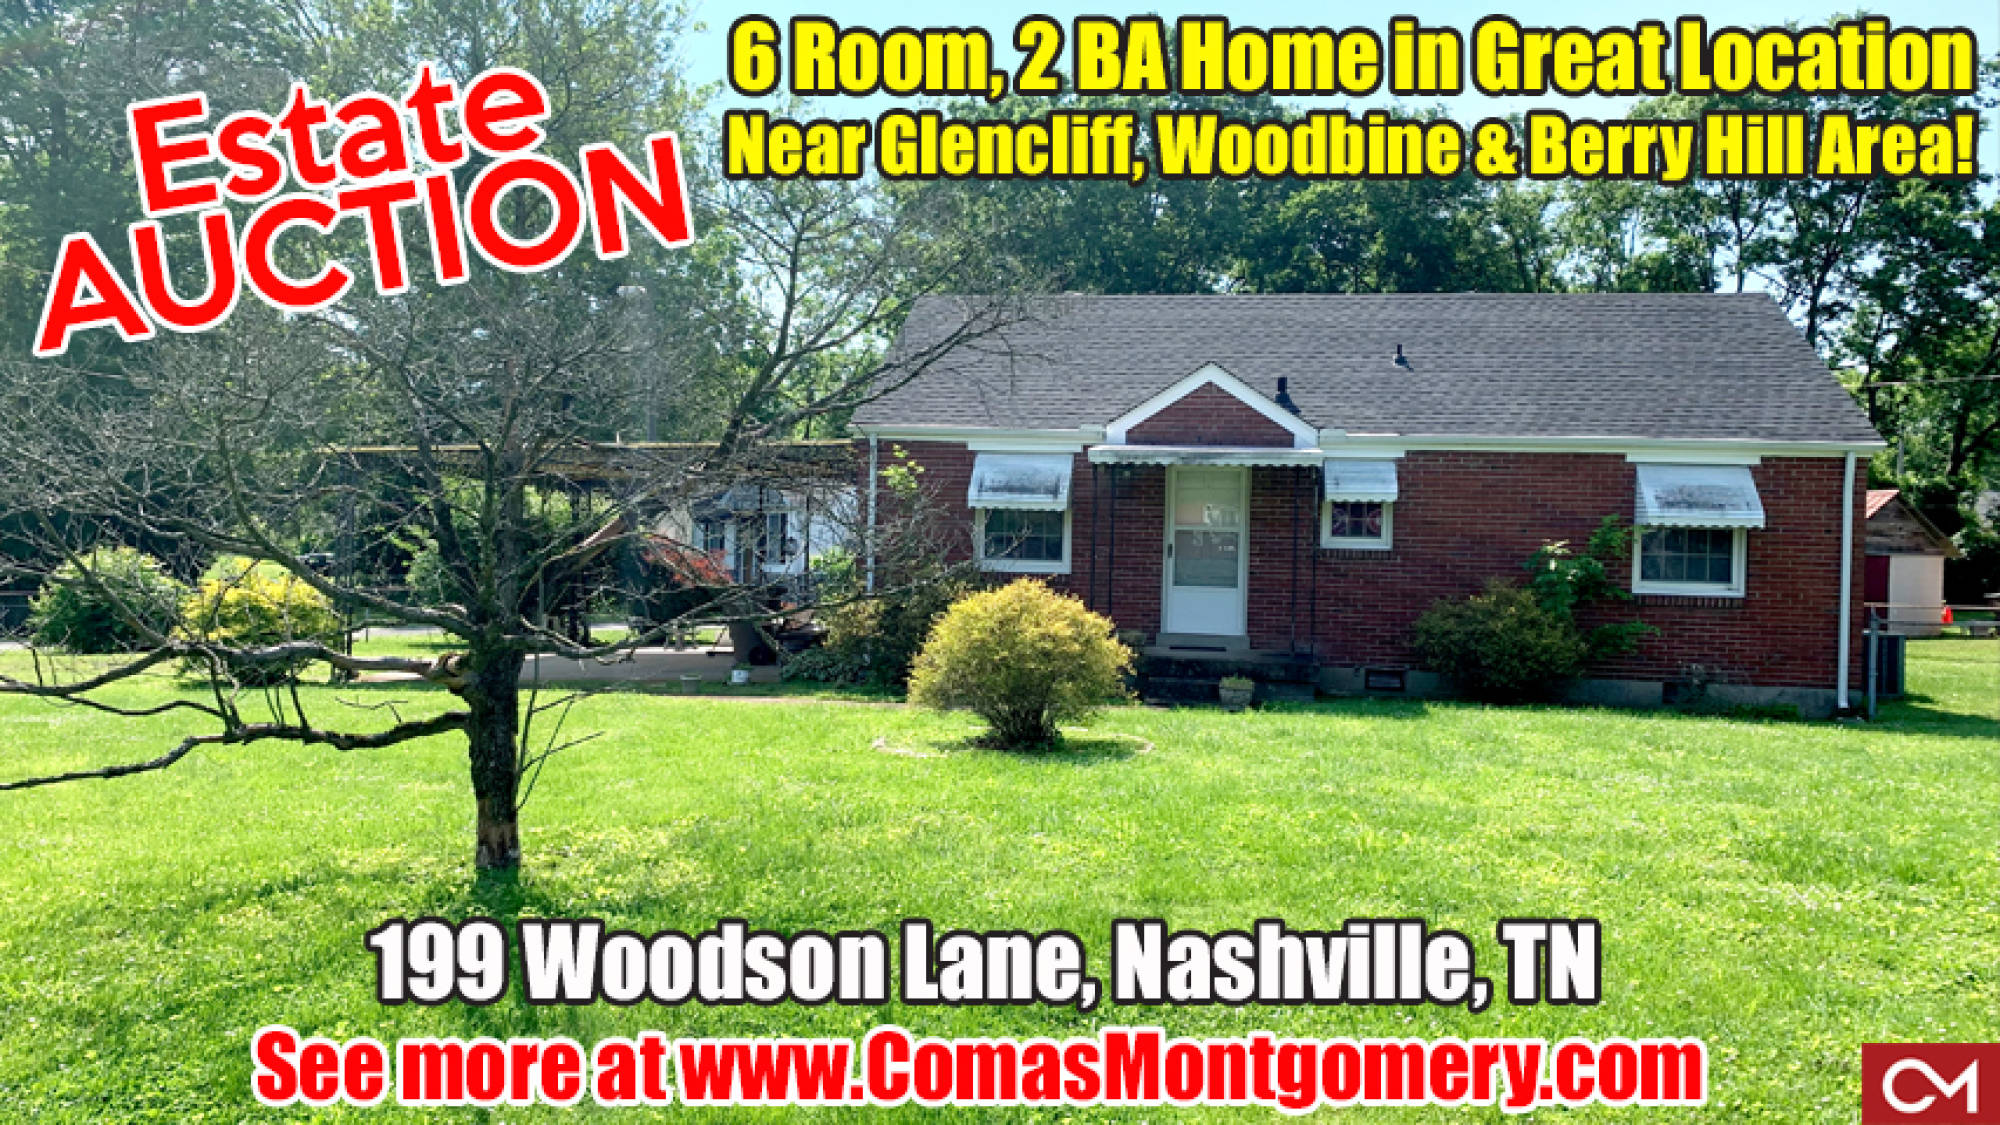 Estate, Auction, Home, House, Nashville, Glencliff, Woodbine, Berry Hill, Woodson, Davidson, Real Estate, for Sale, Investment, Property, Comas, Montgomery, Tennessee